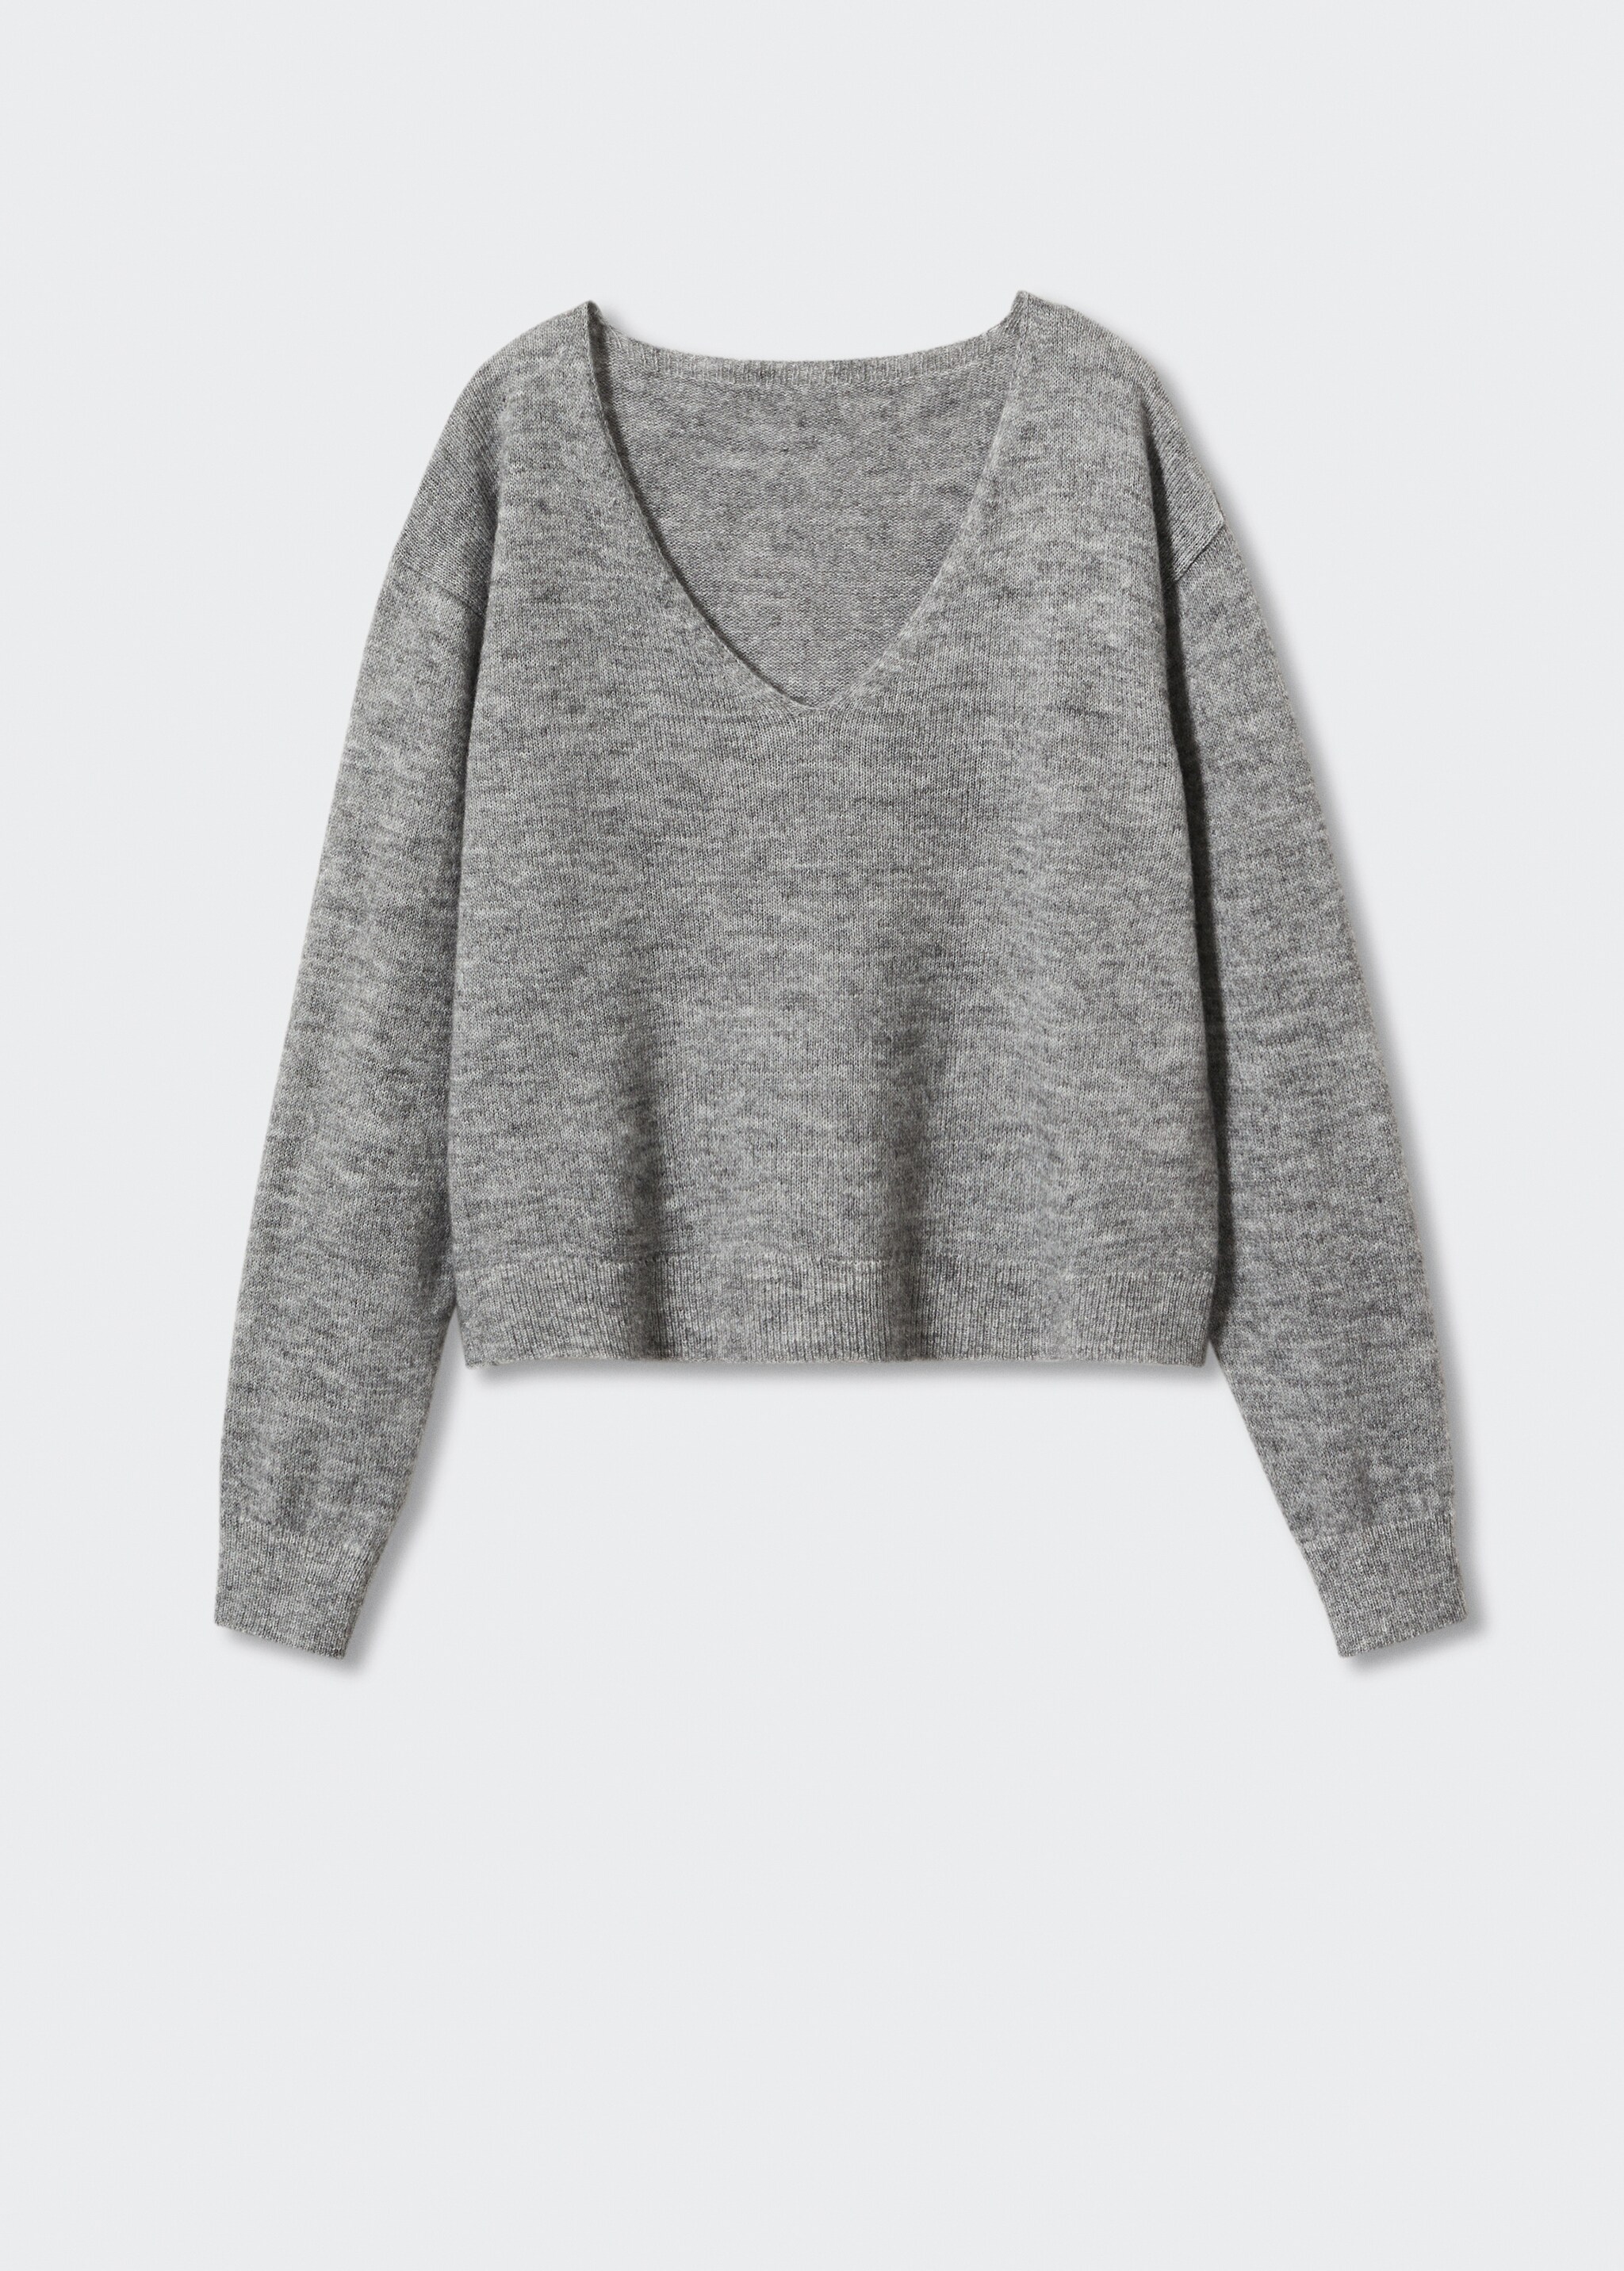 V-neck knit sweater - Article without model